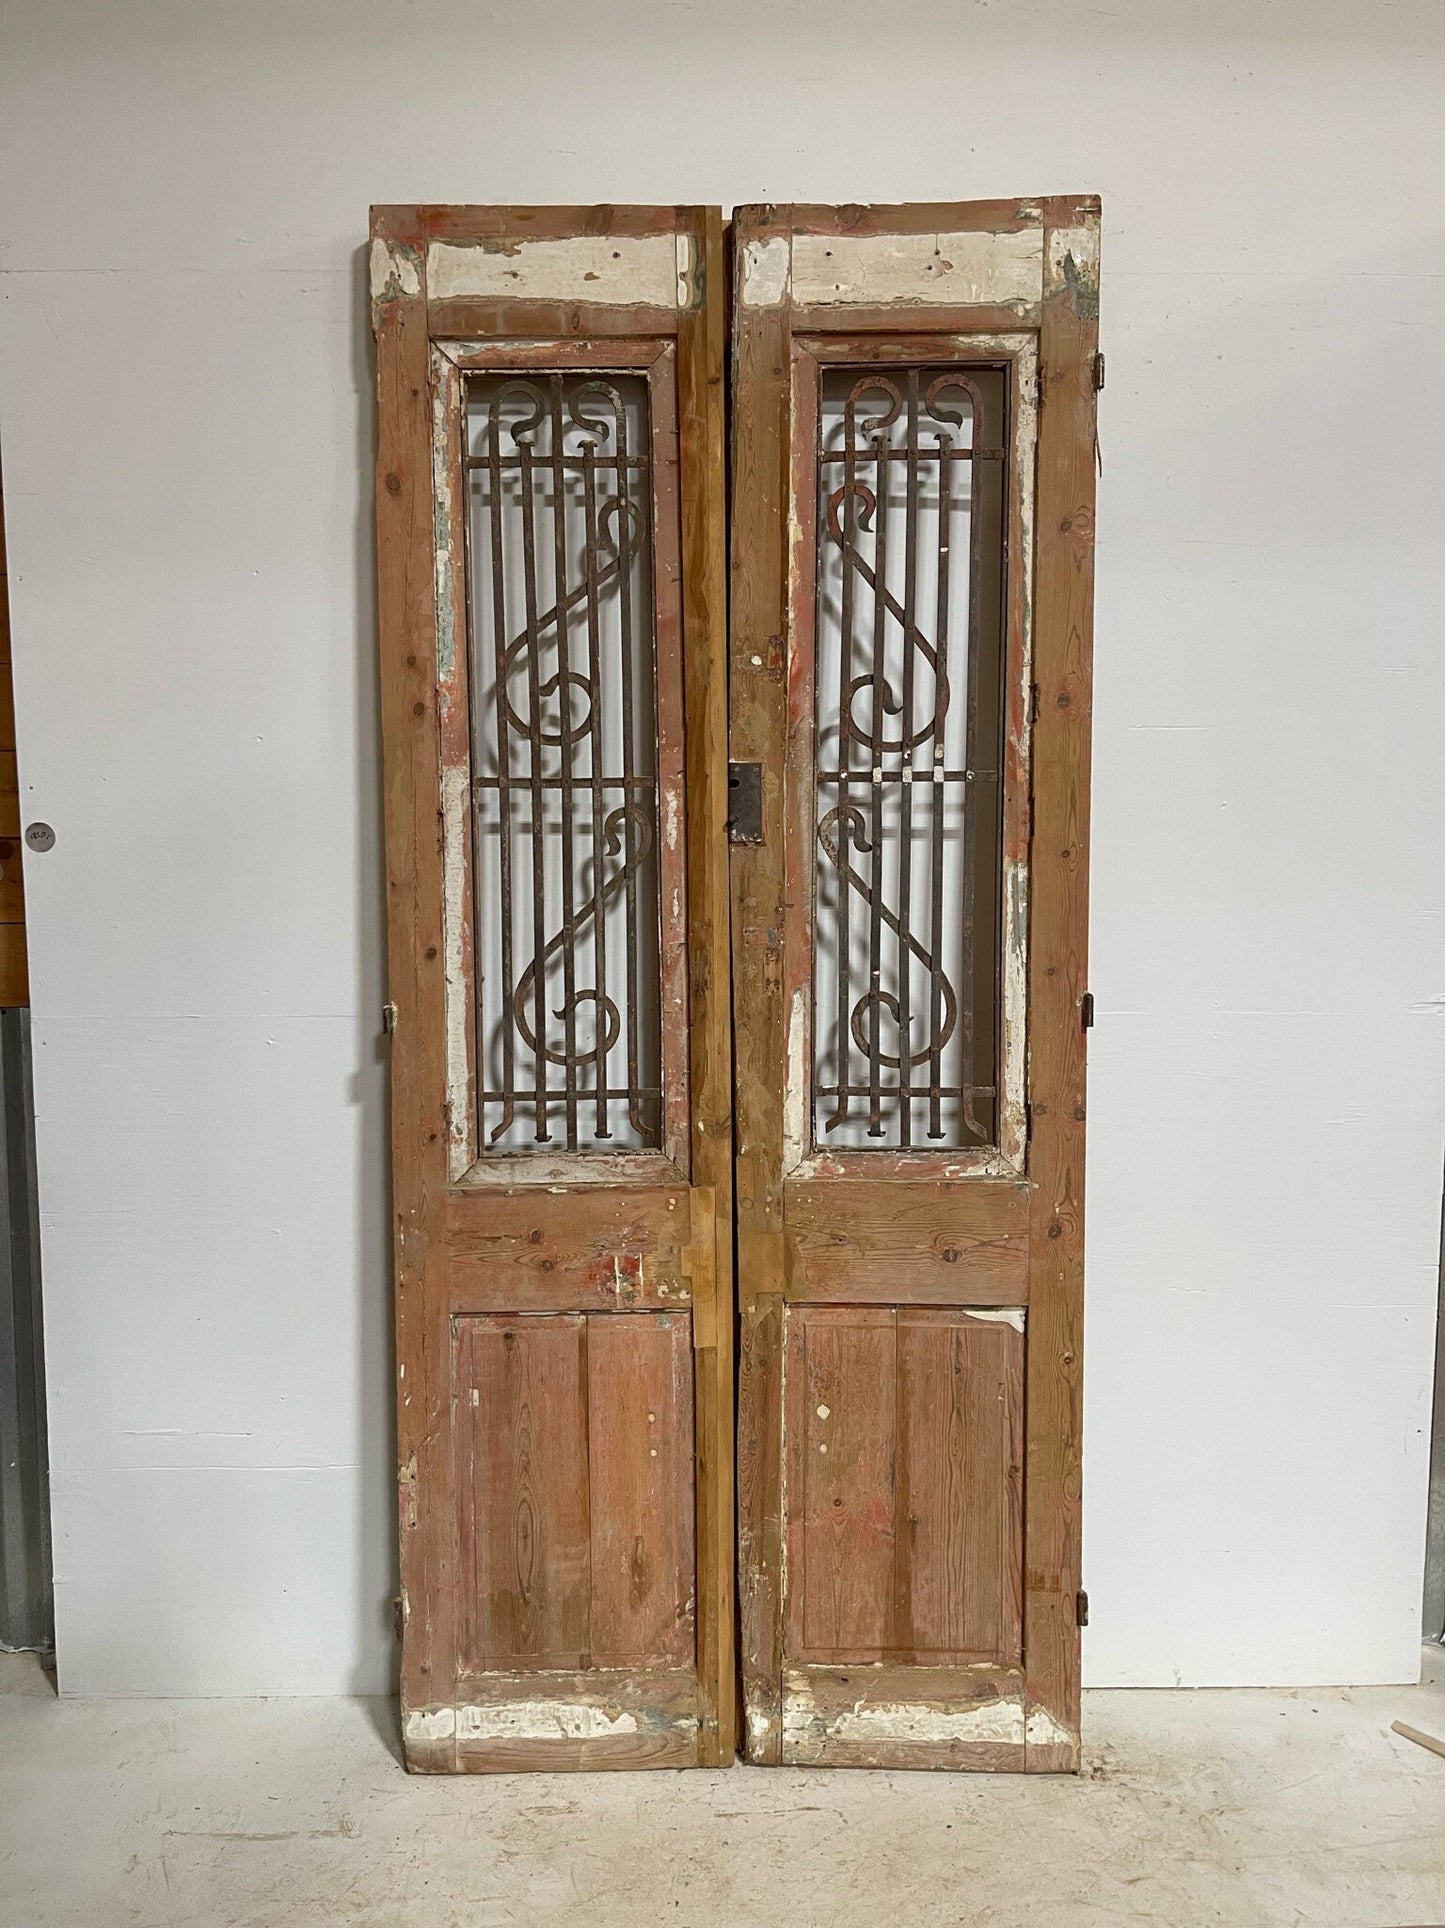 Antique French doors (98.75X44) with metal G0954